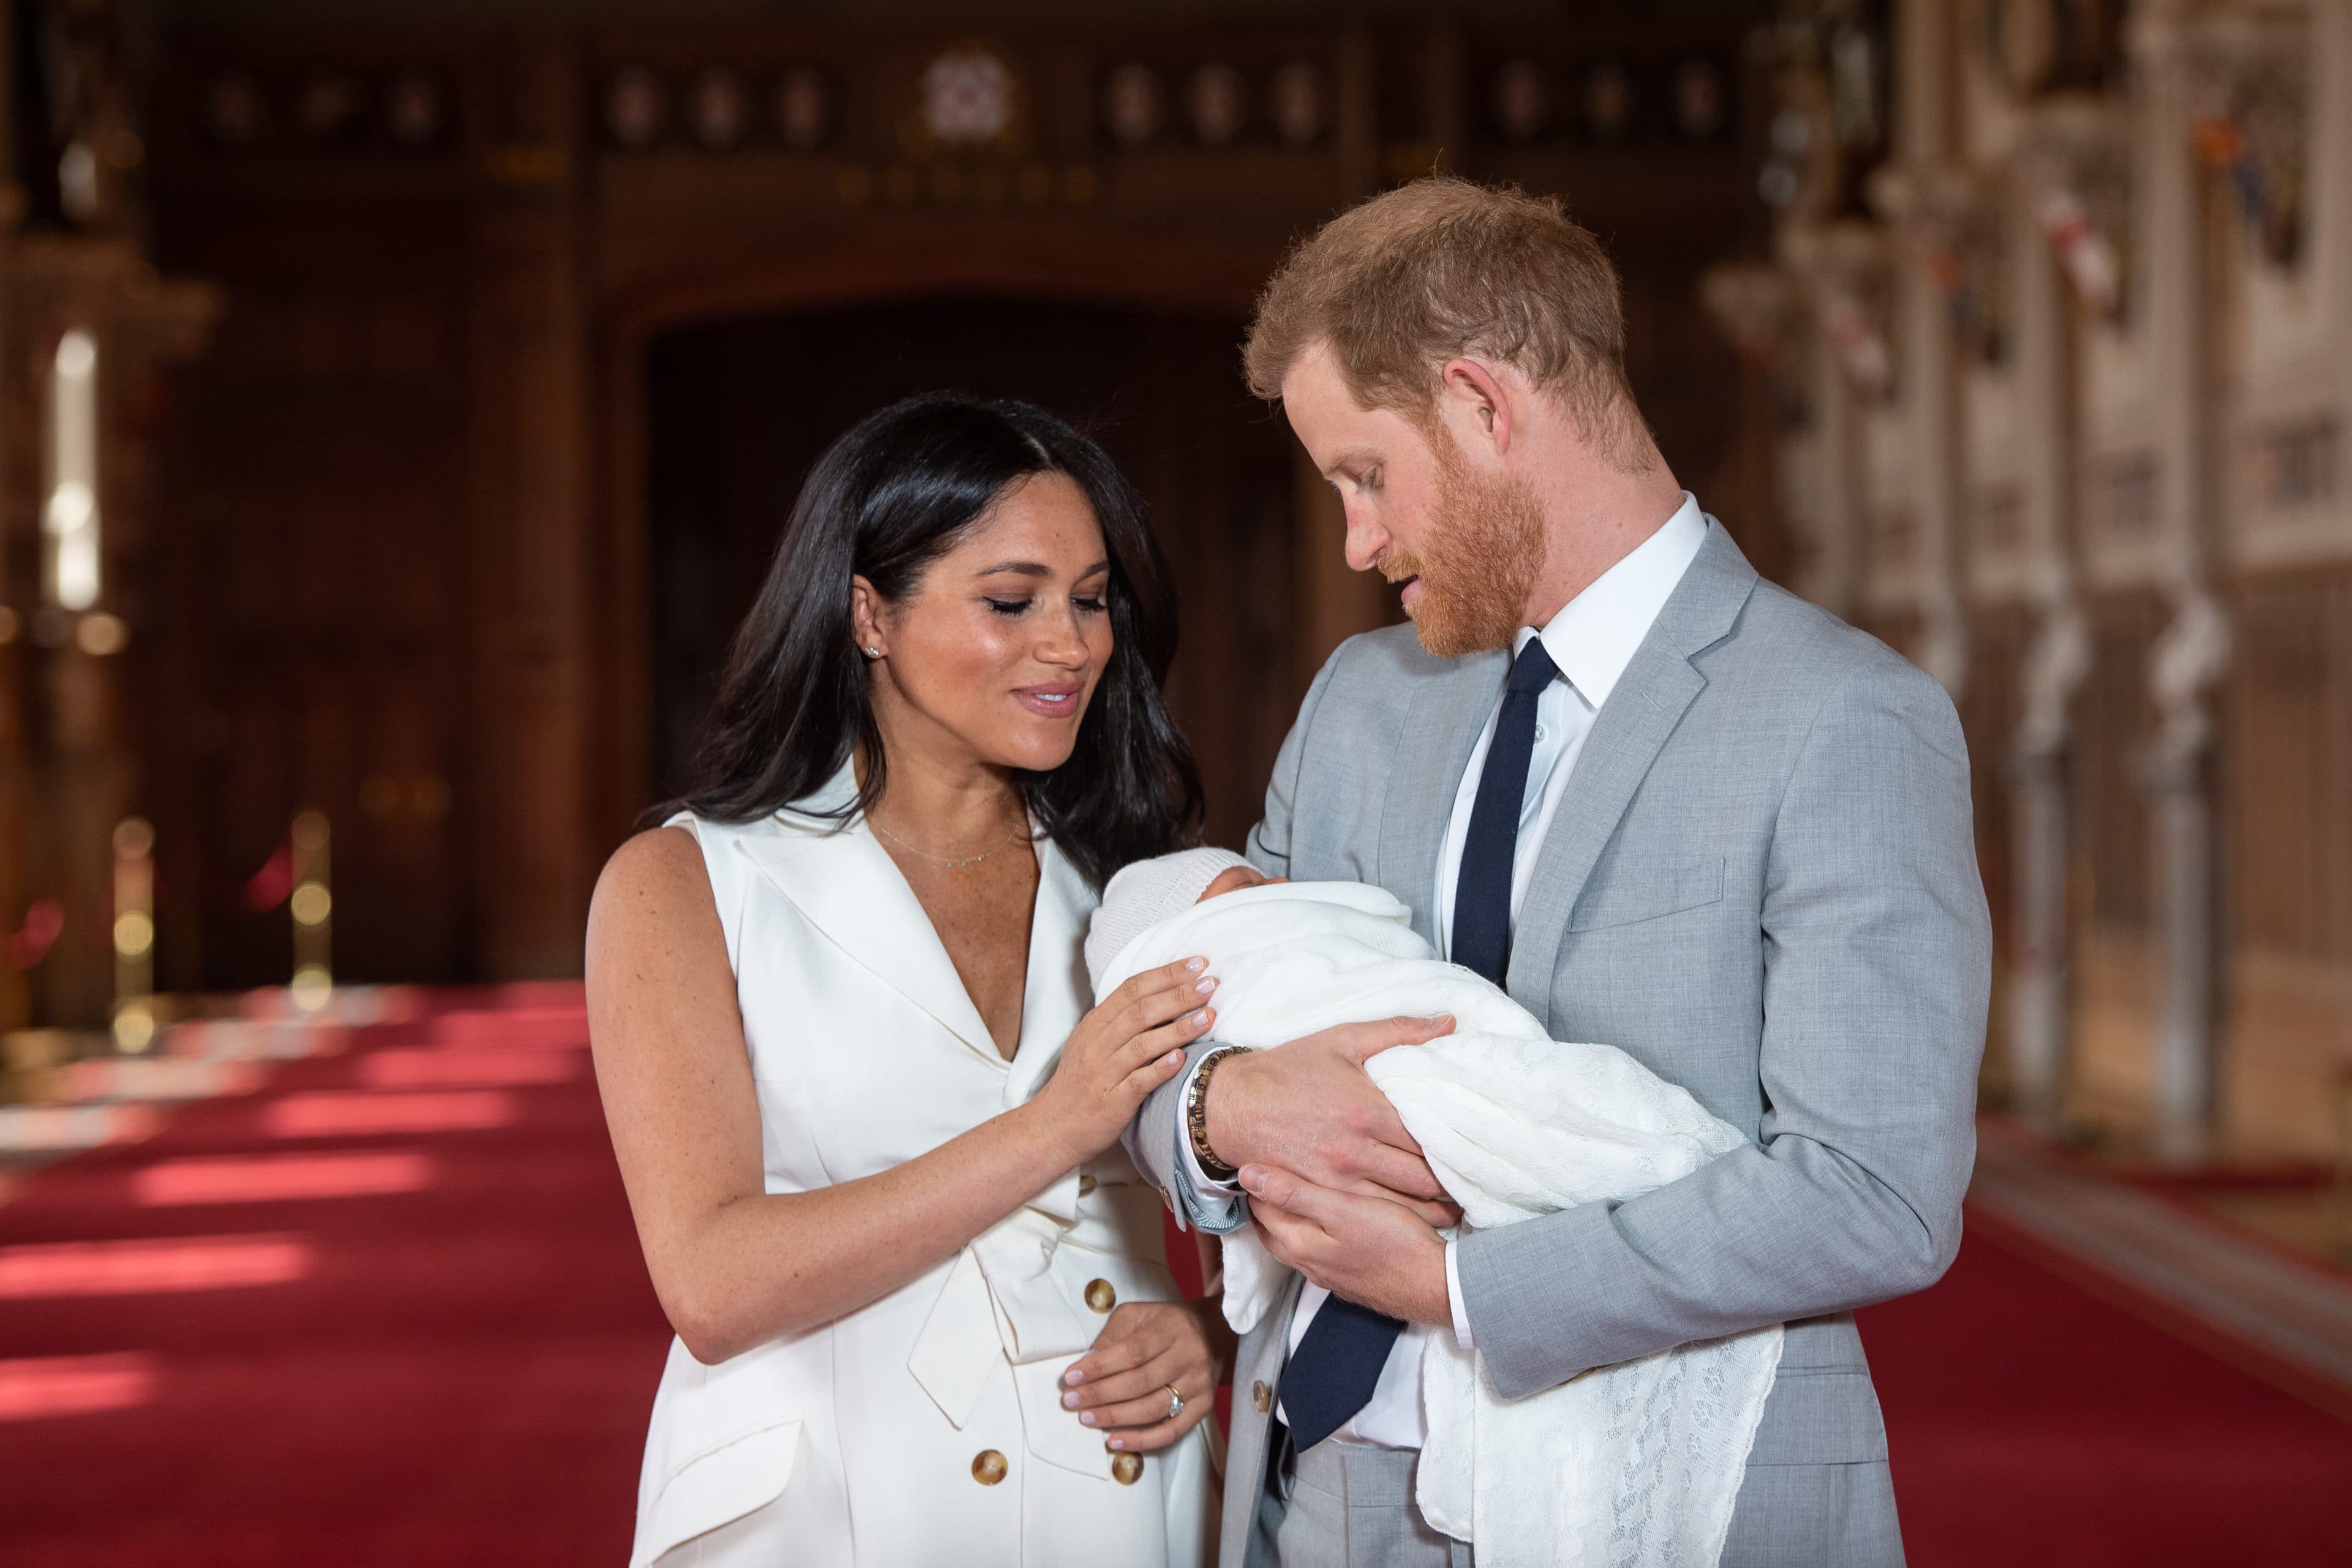 He’s Here! Prince Harry and Meghan Markle Debut Their Baby Boy